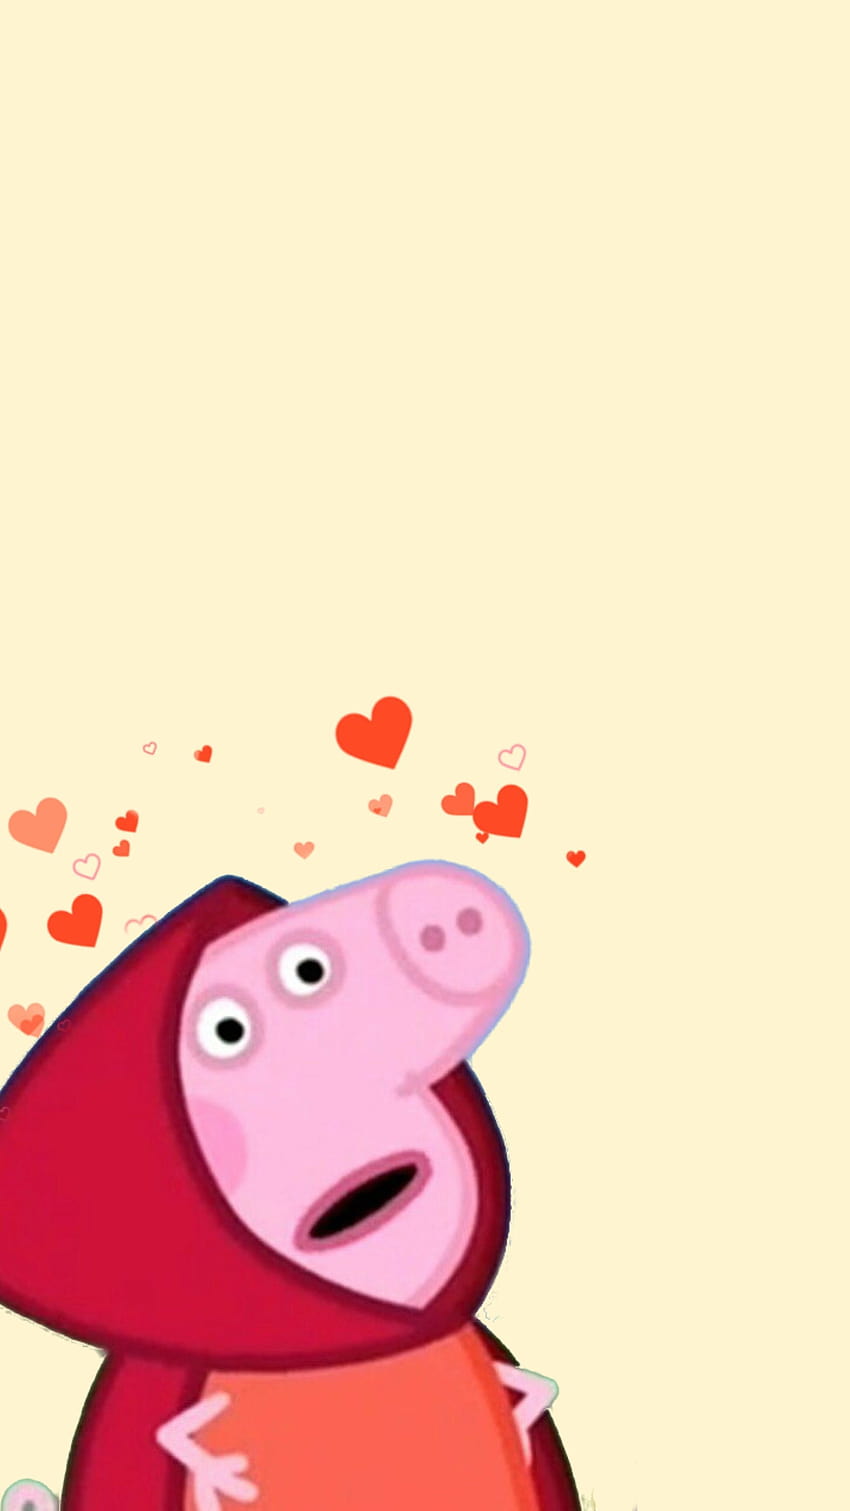 Aesthetic Peppa Pig posted by Zoey Simpson, peppa pig phone HD phone wallpaper